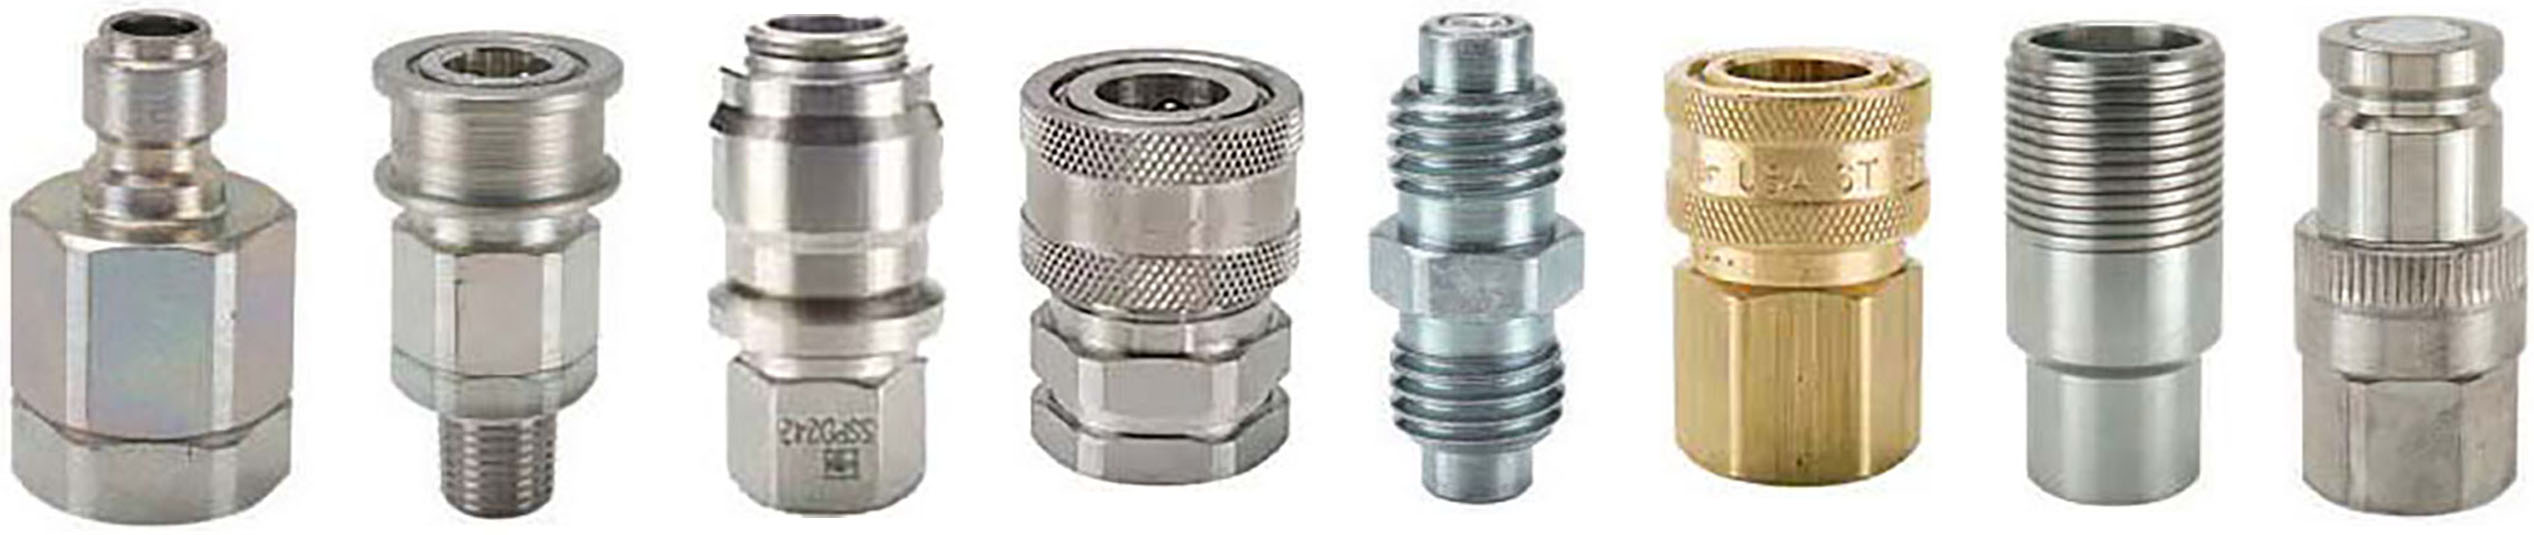 hydraulic-quick-couplings-family-photo